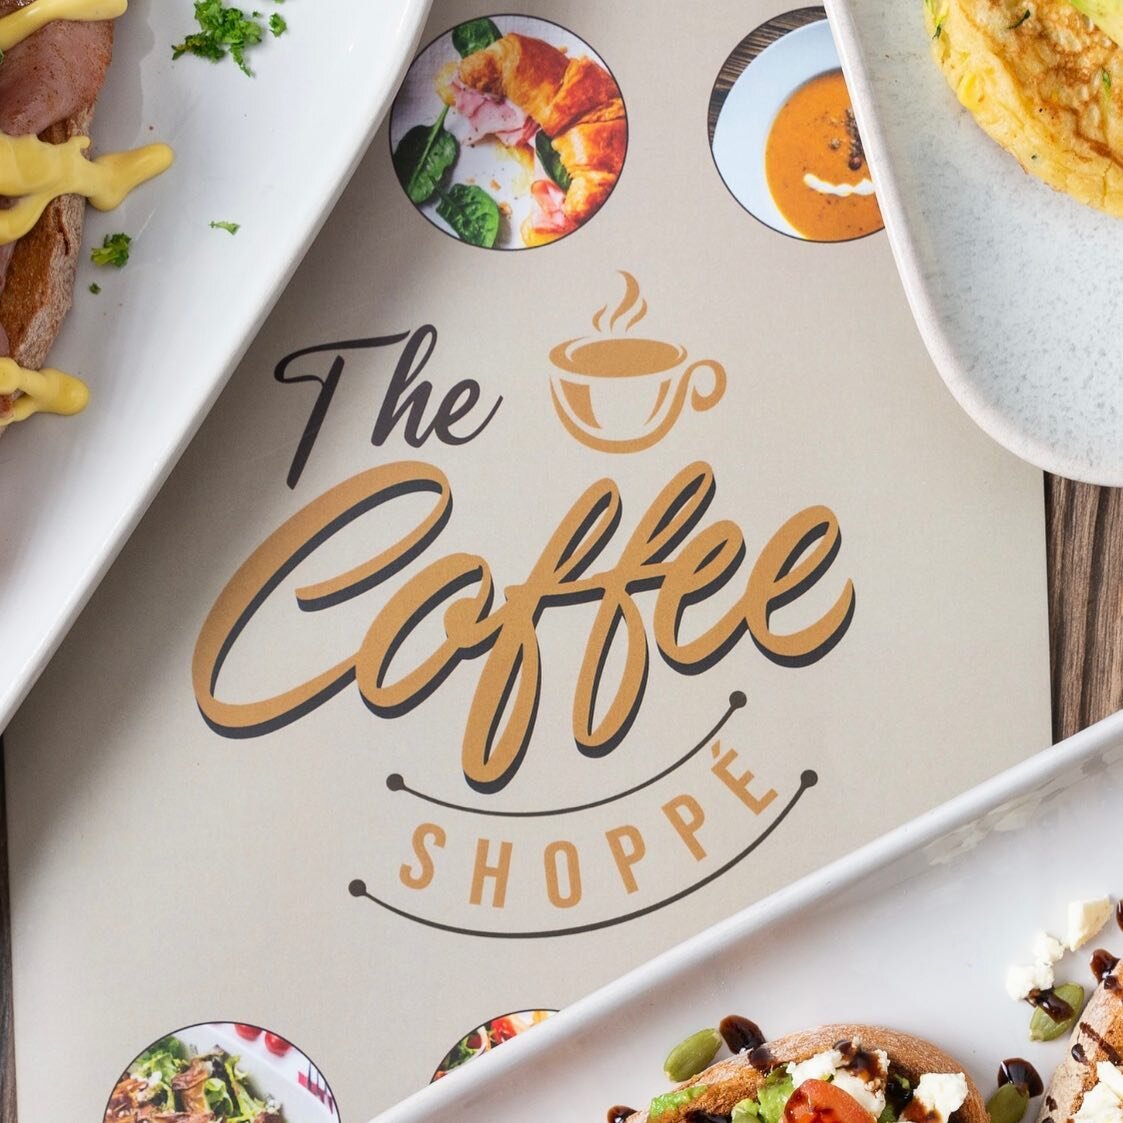 We&rsquo;re so excited to reveal the brand new logo for the The Coffee Shopp&egrave;! 😍

What we wanted our logo to perceive a fun, energetic and professional coffee shop, and we couldn&rsquo;t be more happier with the outcome! 

Just a reminder tha